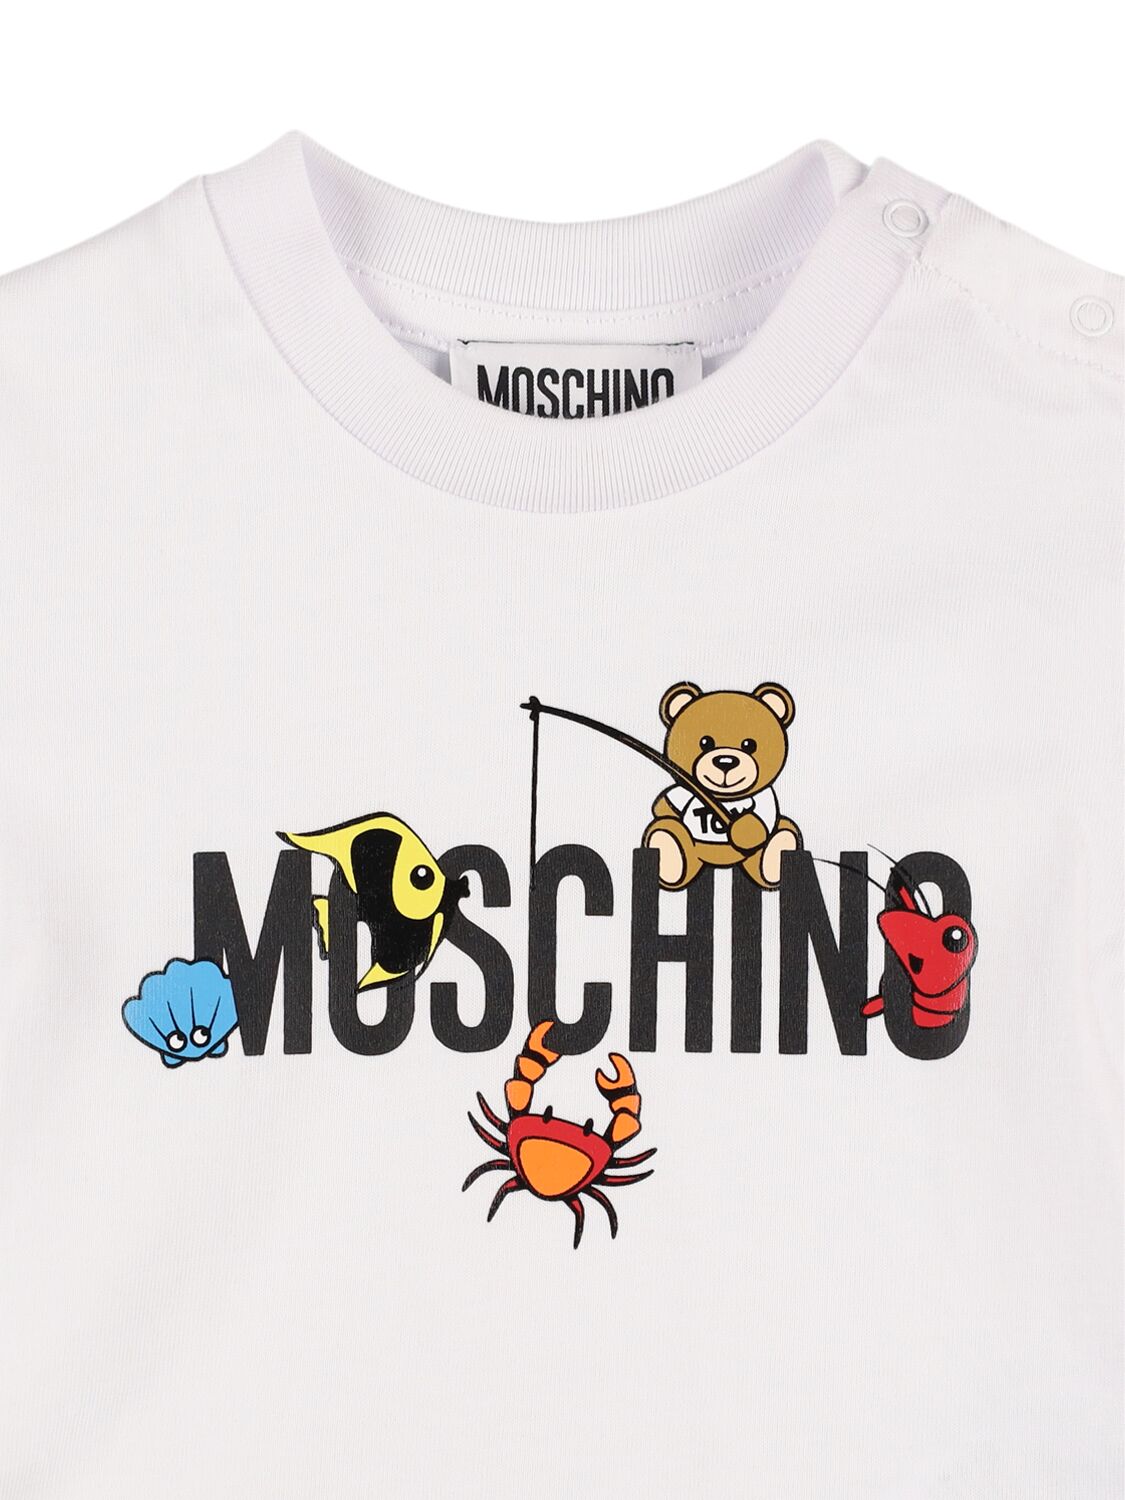 Shop Moschino Cotton Jersey T-shirt & Shorts In Lime Green